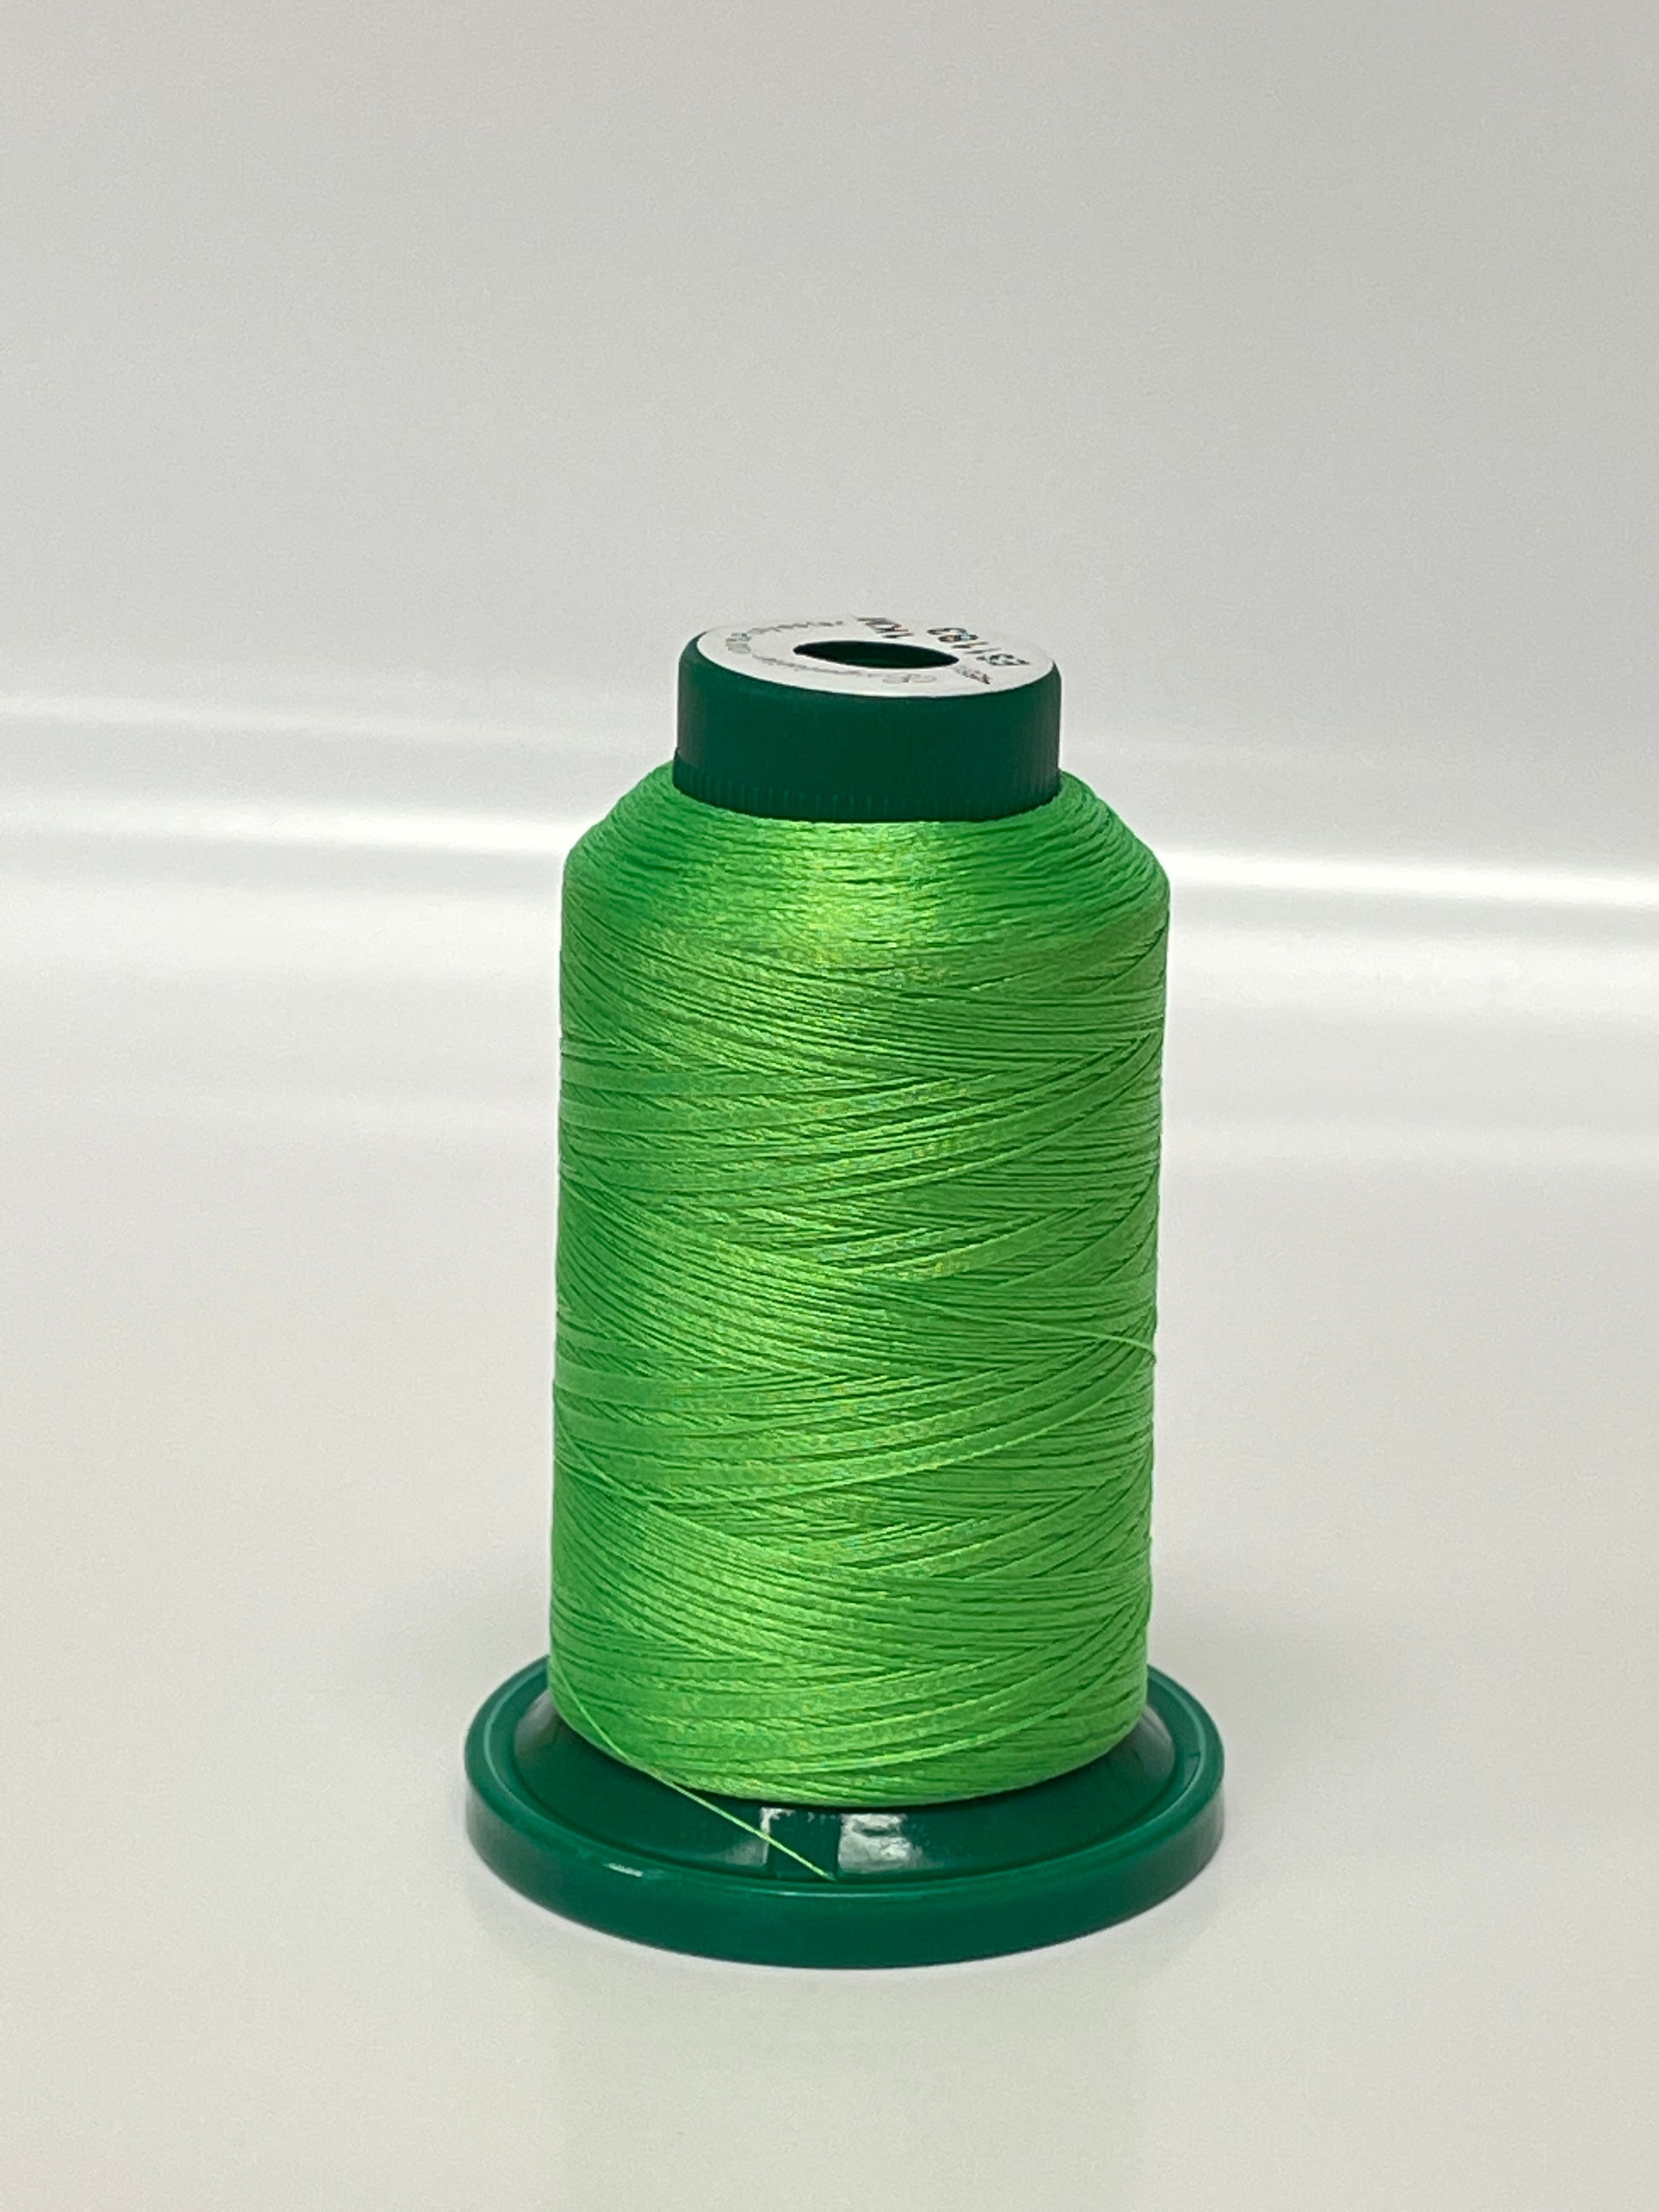 Exquisite Embroidery Threads Leabu - Center Sewing – Greens